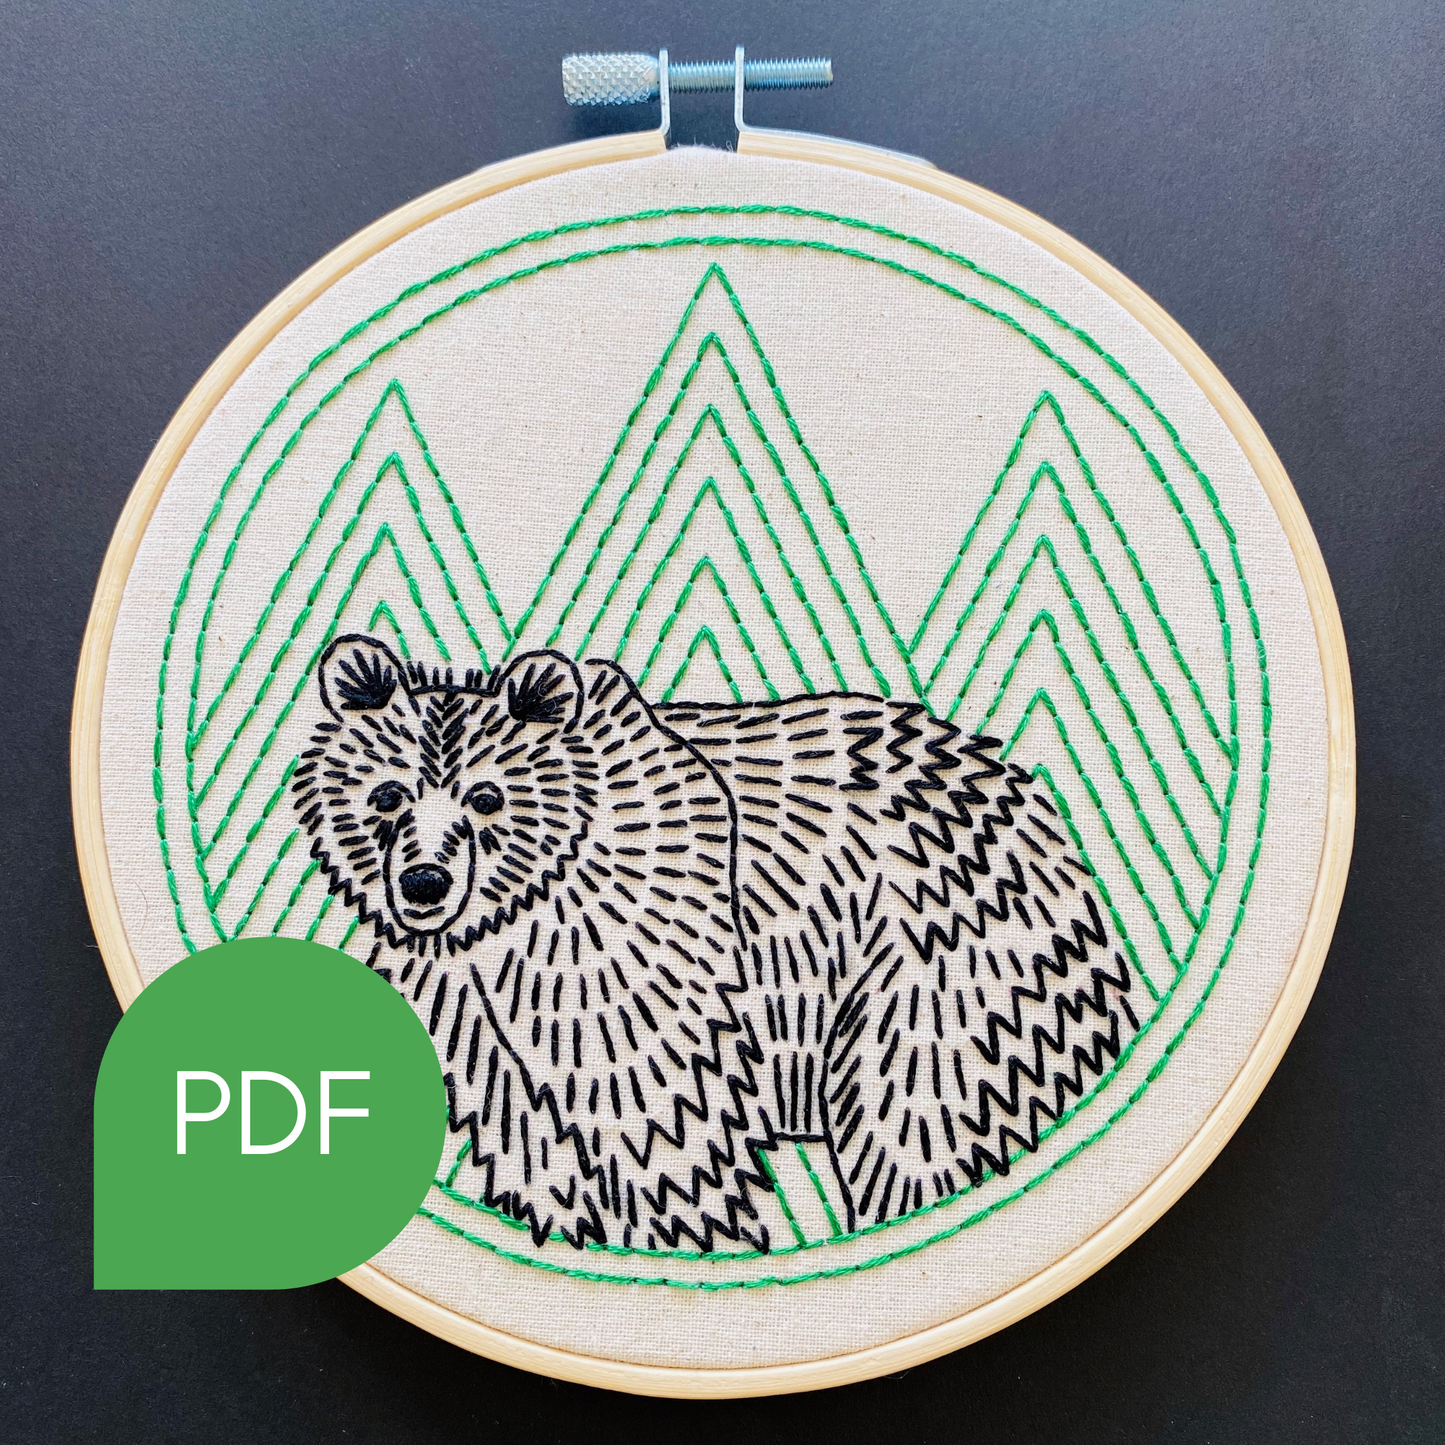 Bear with Me Embroidery PDF Download